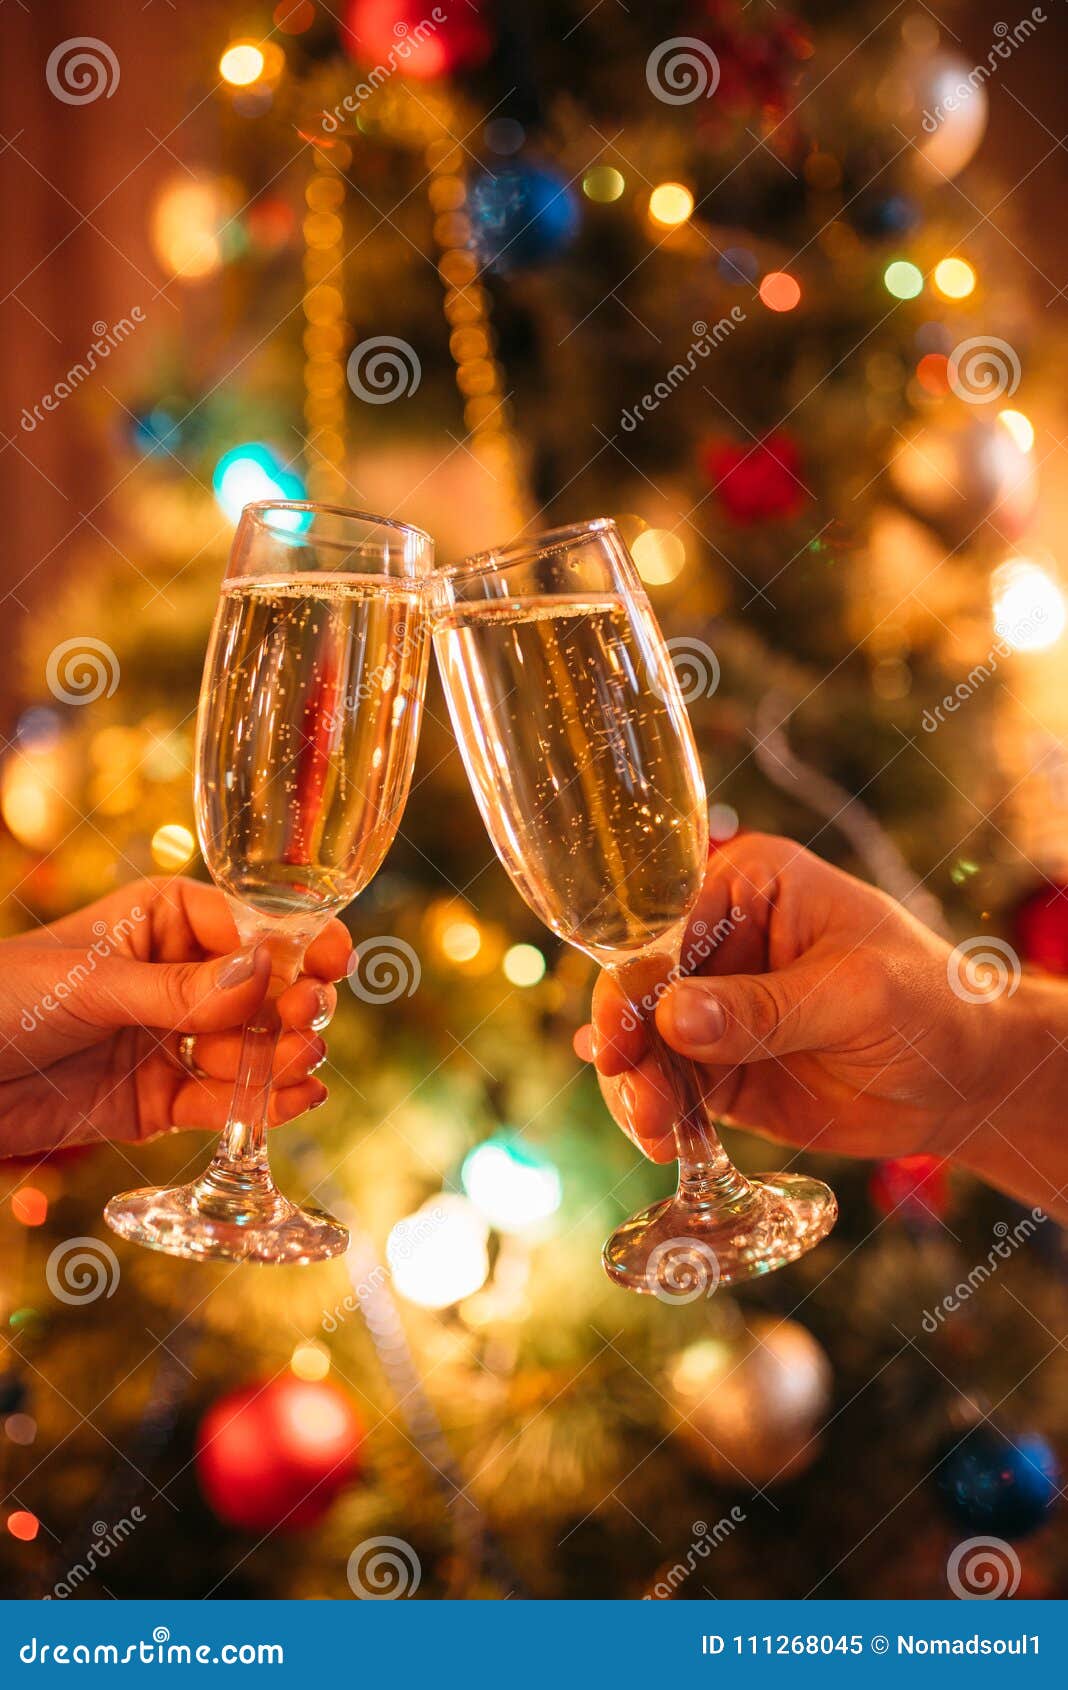 Two Hands Clink Glasses With Champagne Christmas Stock Image Image Of Happy Love 111268045